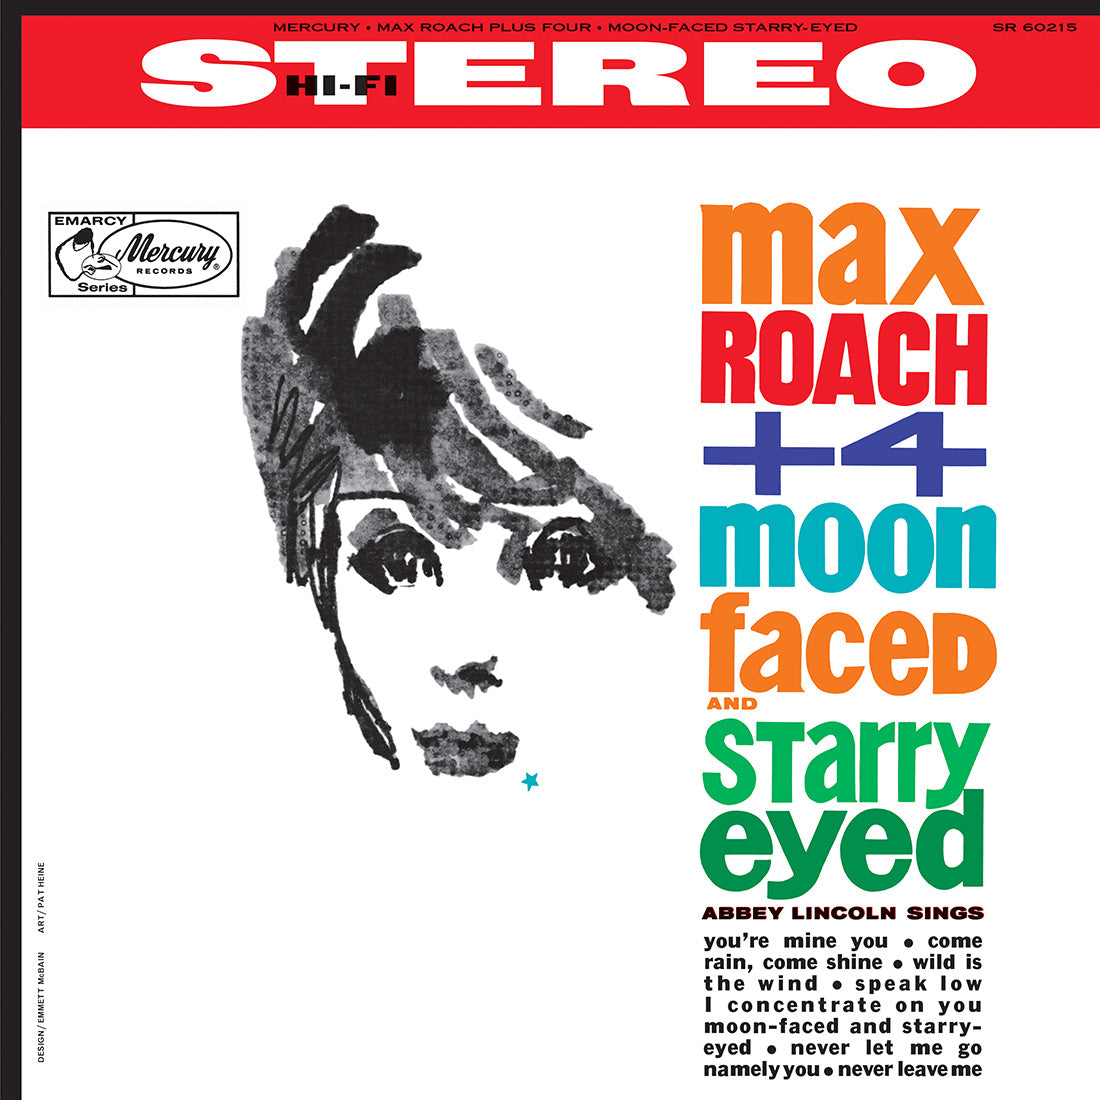 Max Roach +4 - Moon Faced and Starry Eyed (Verve By Request): Vinyl LP